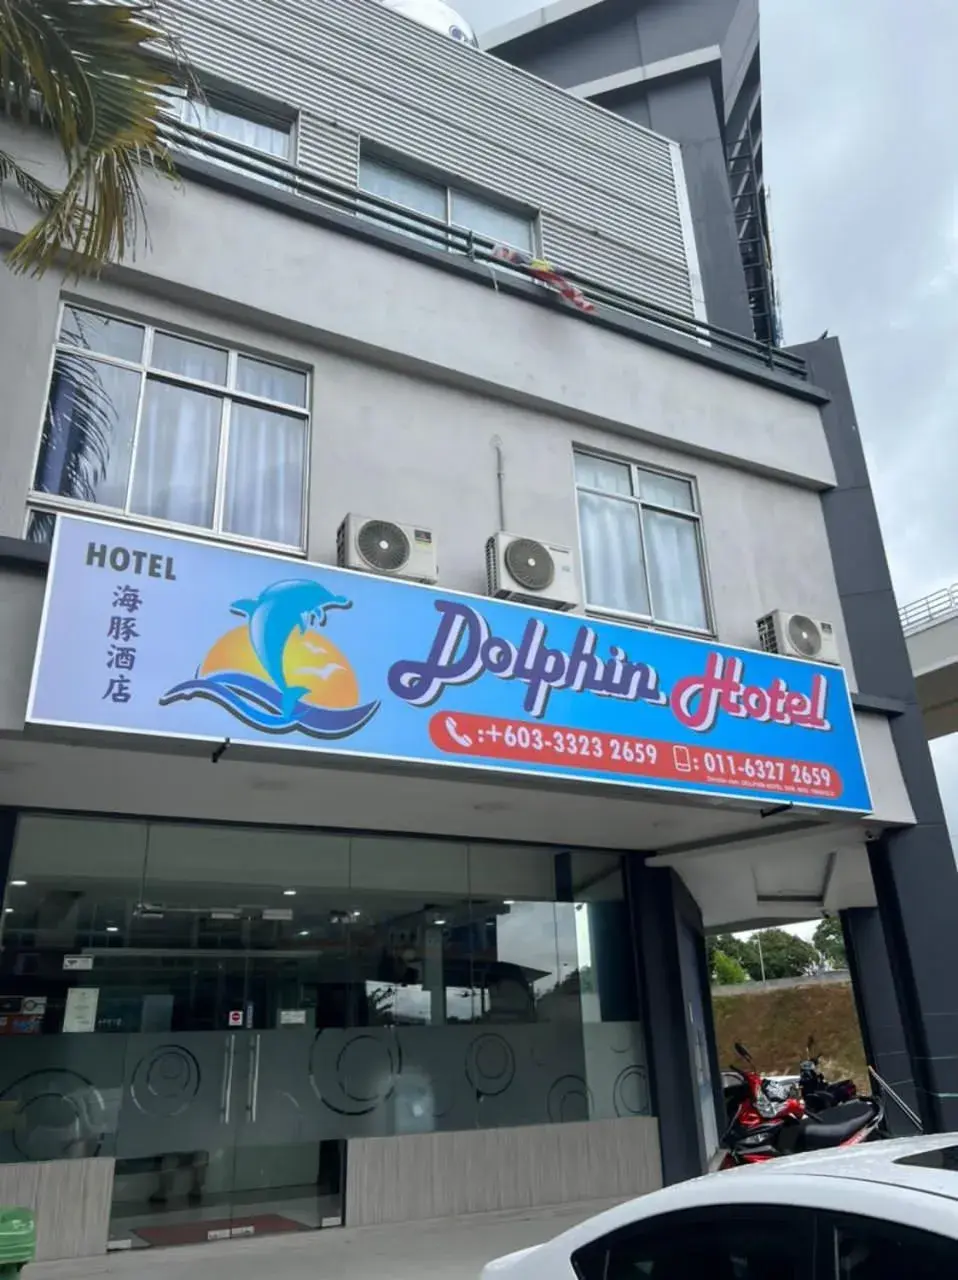 Property Building in Dolphin Hotel